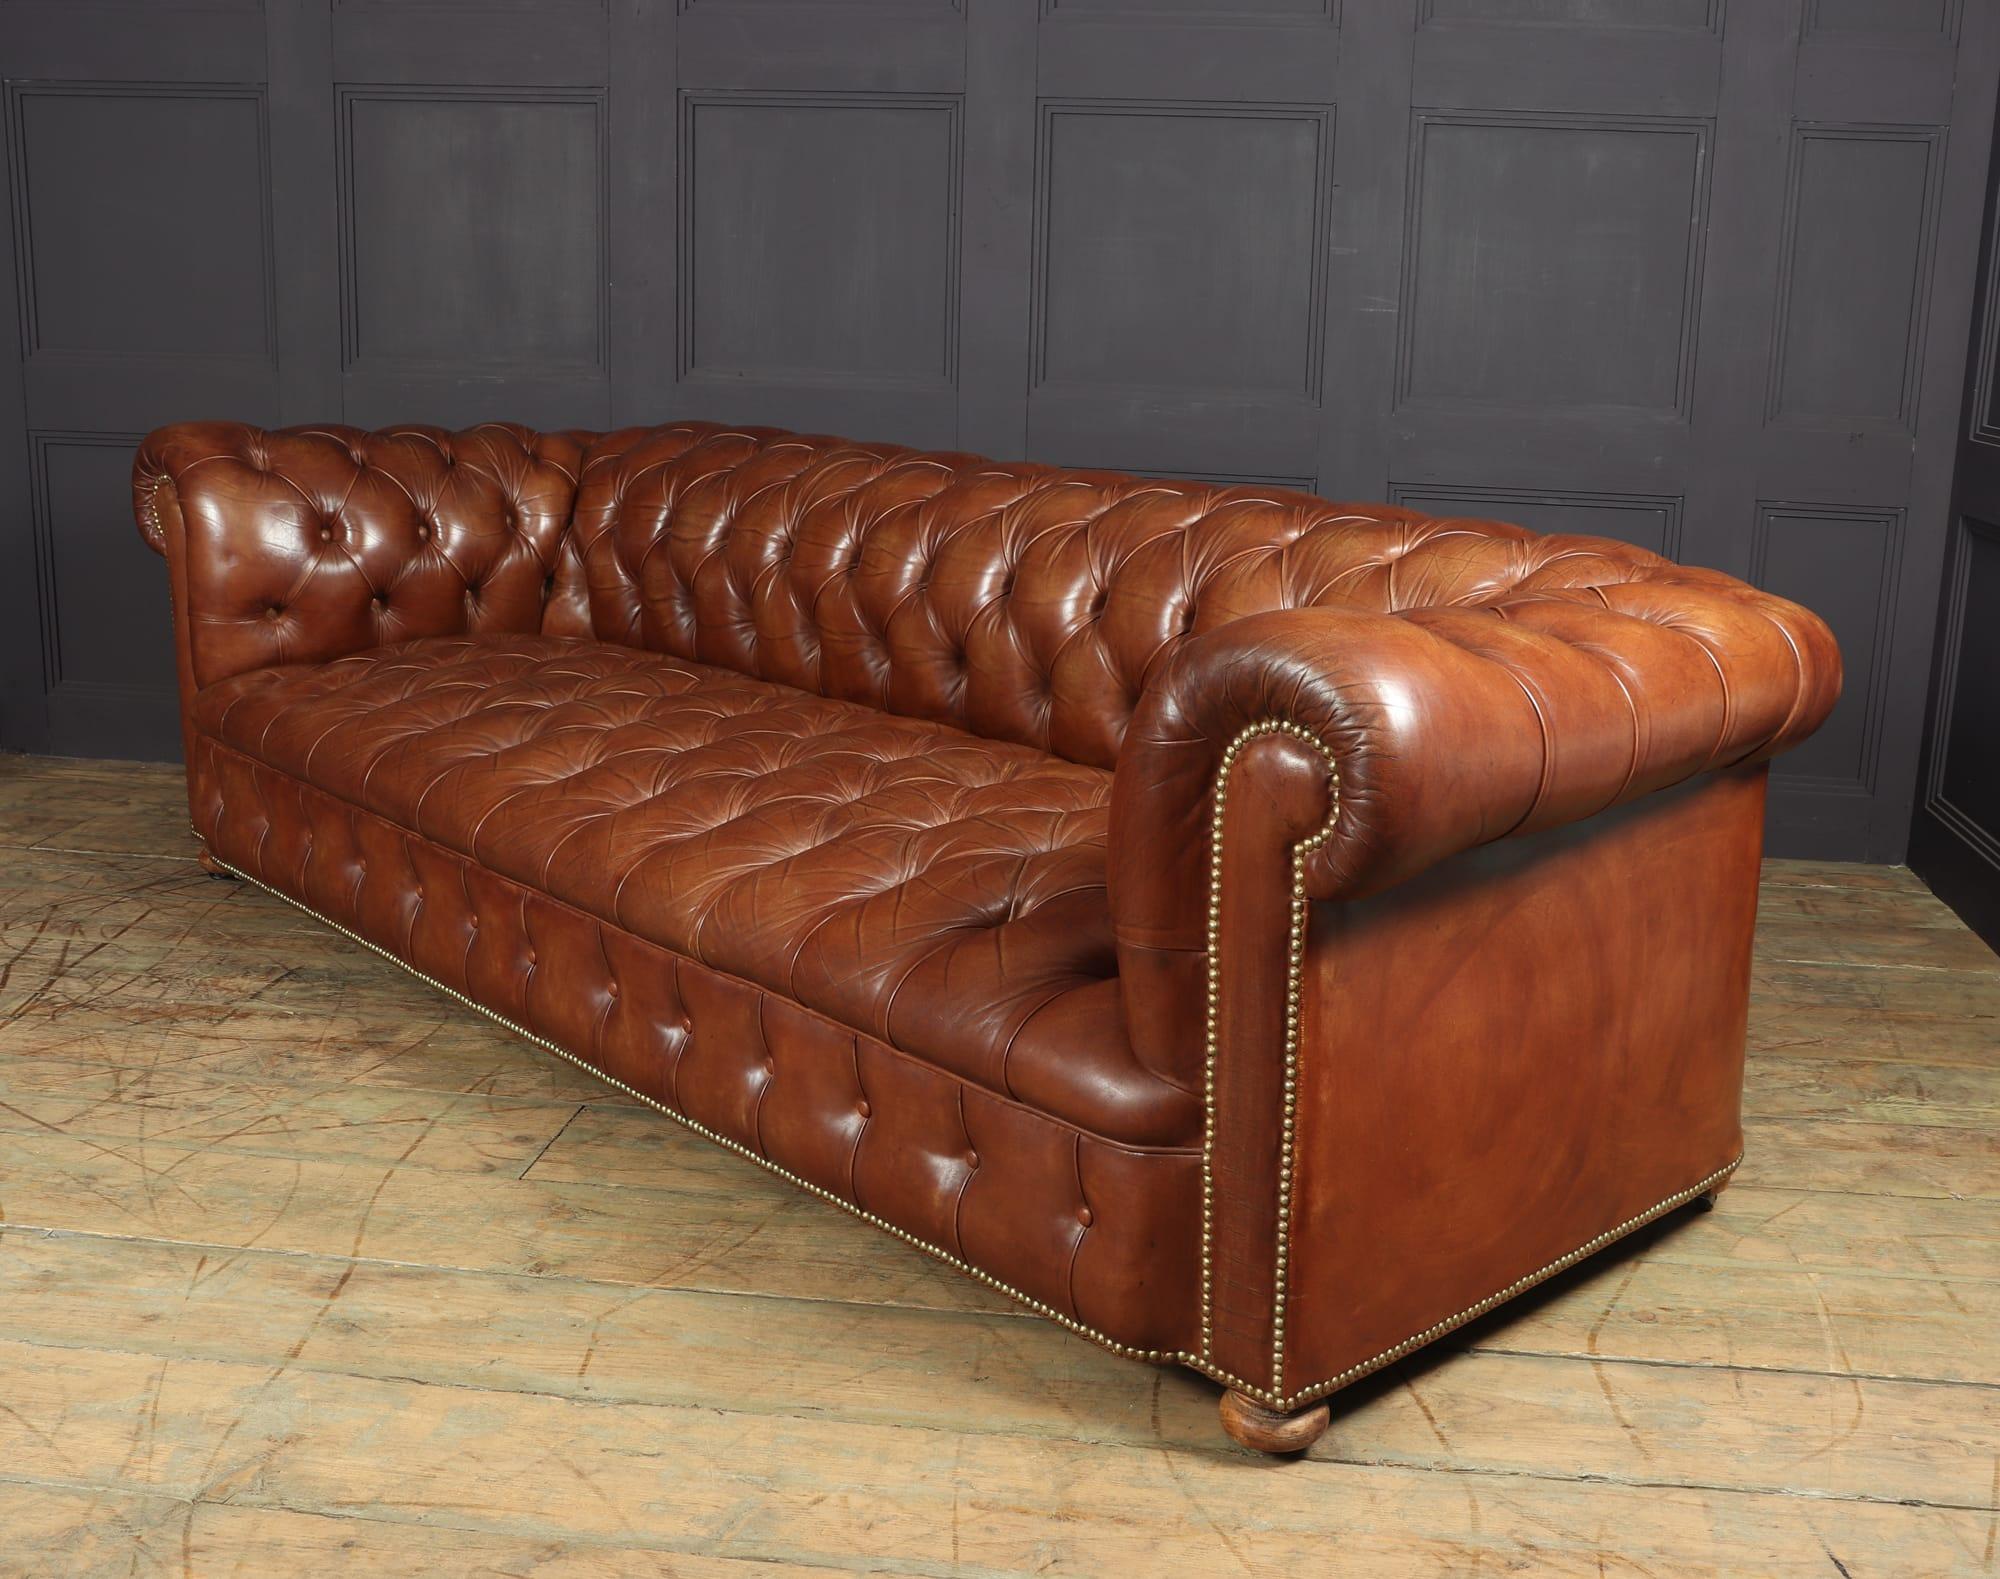 Vintage Leather Chesterfield Sofa 4 seat 2